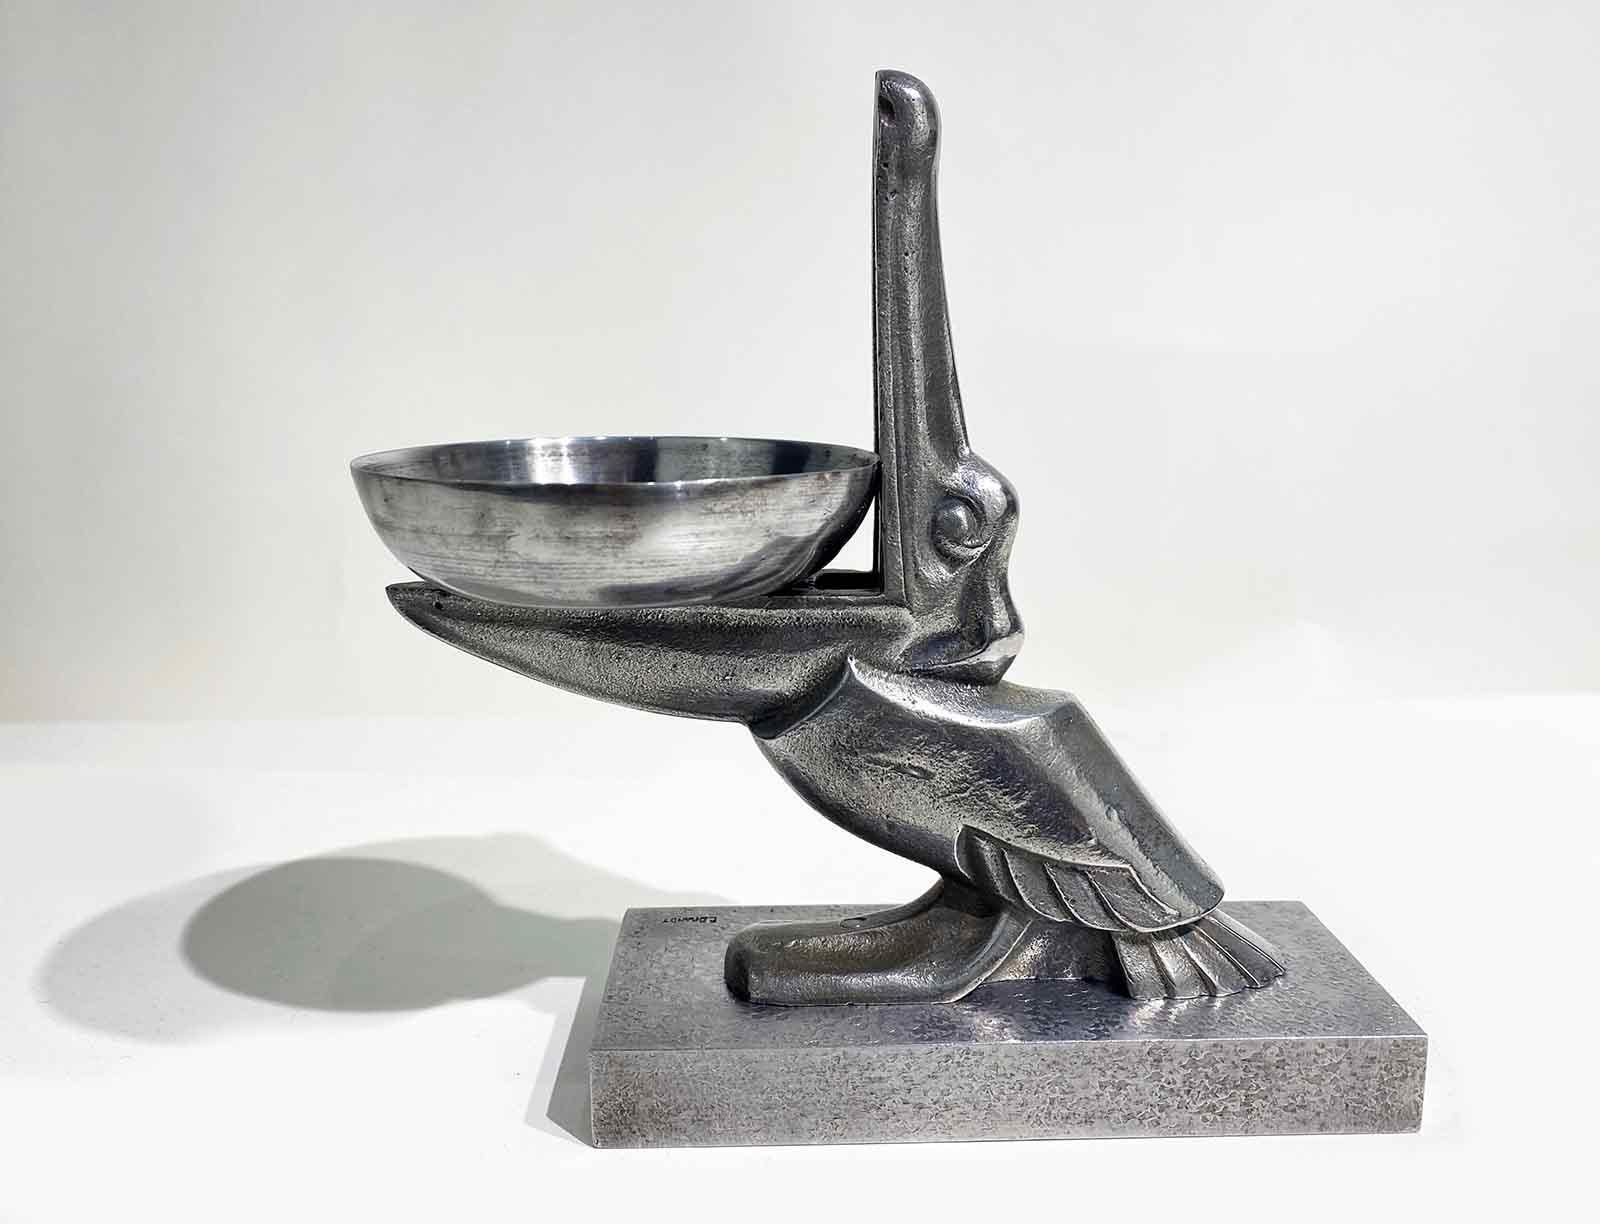 An Art Deco pelican ash or desk tray in wrought and cast iron by Edgar Brandt.
This model is illustrated on page 165 in the book Edgar Brandt “Edgar Brandt master of Art Deco ironwork” by Joan Kahr. Published by Abrams.
Made in France, circa